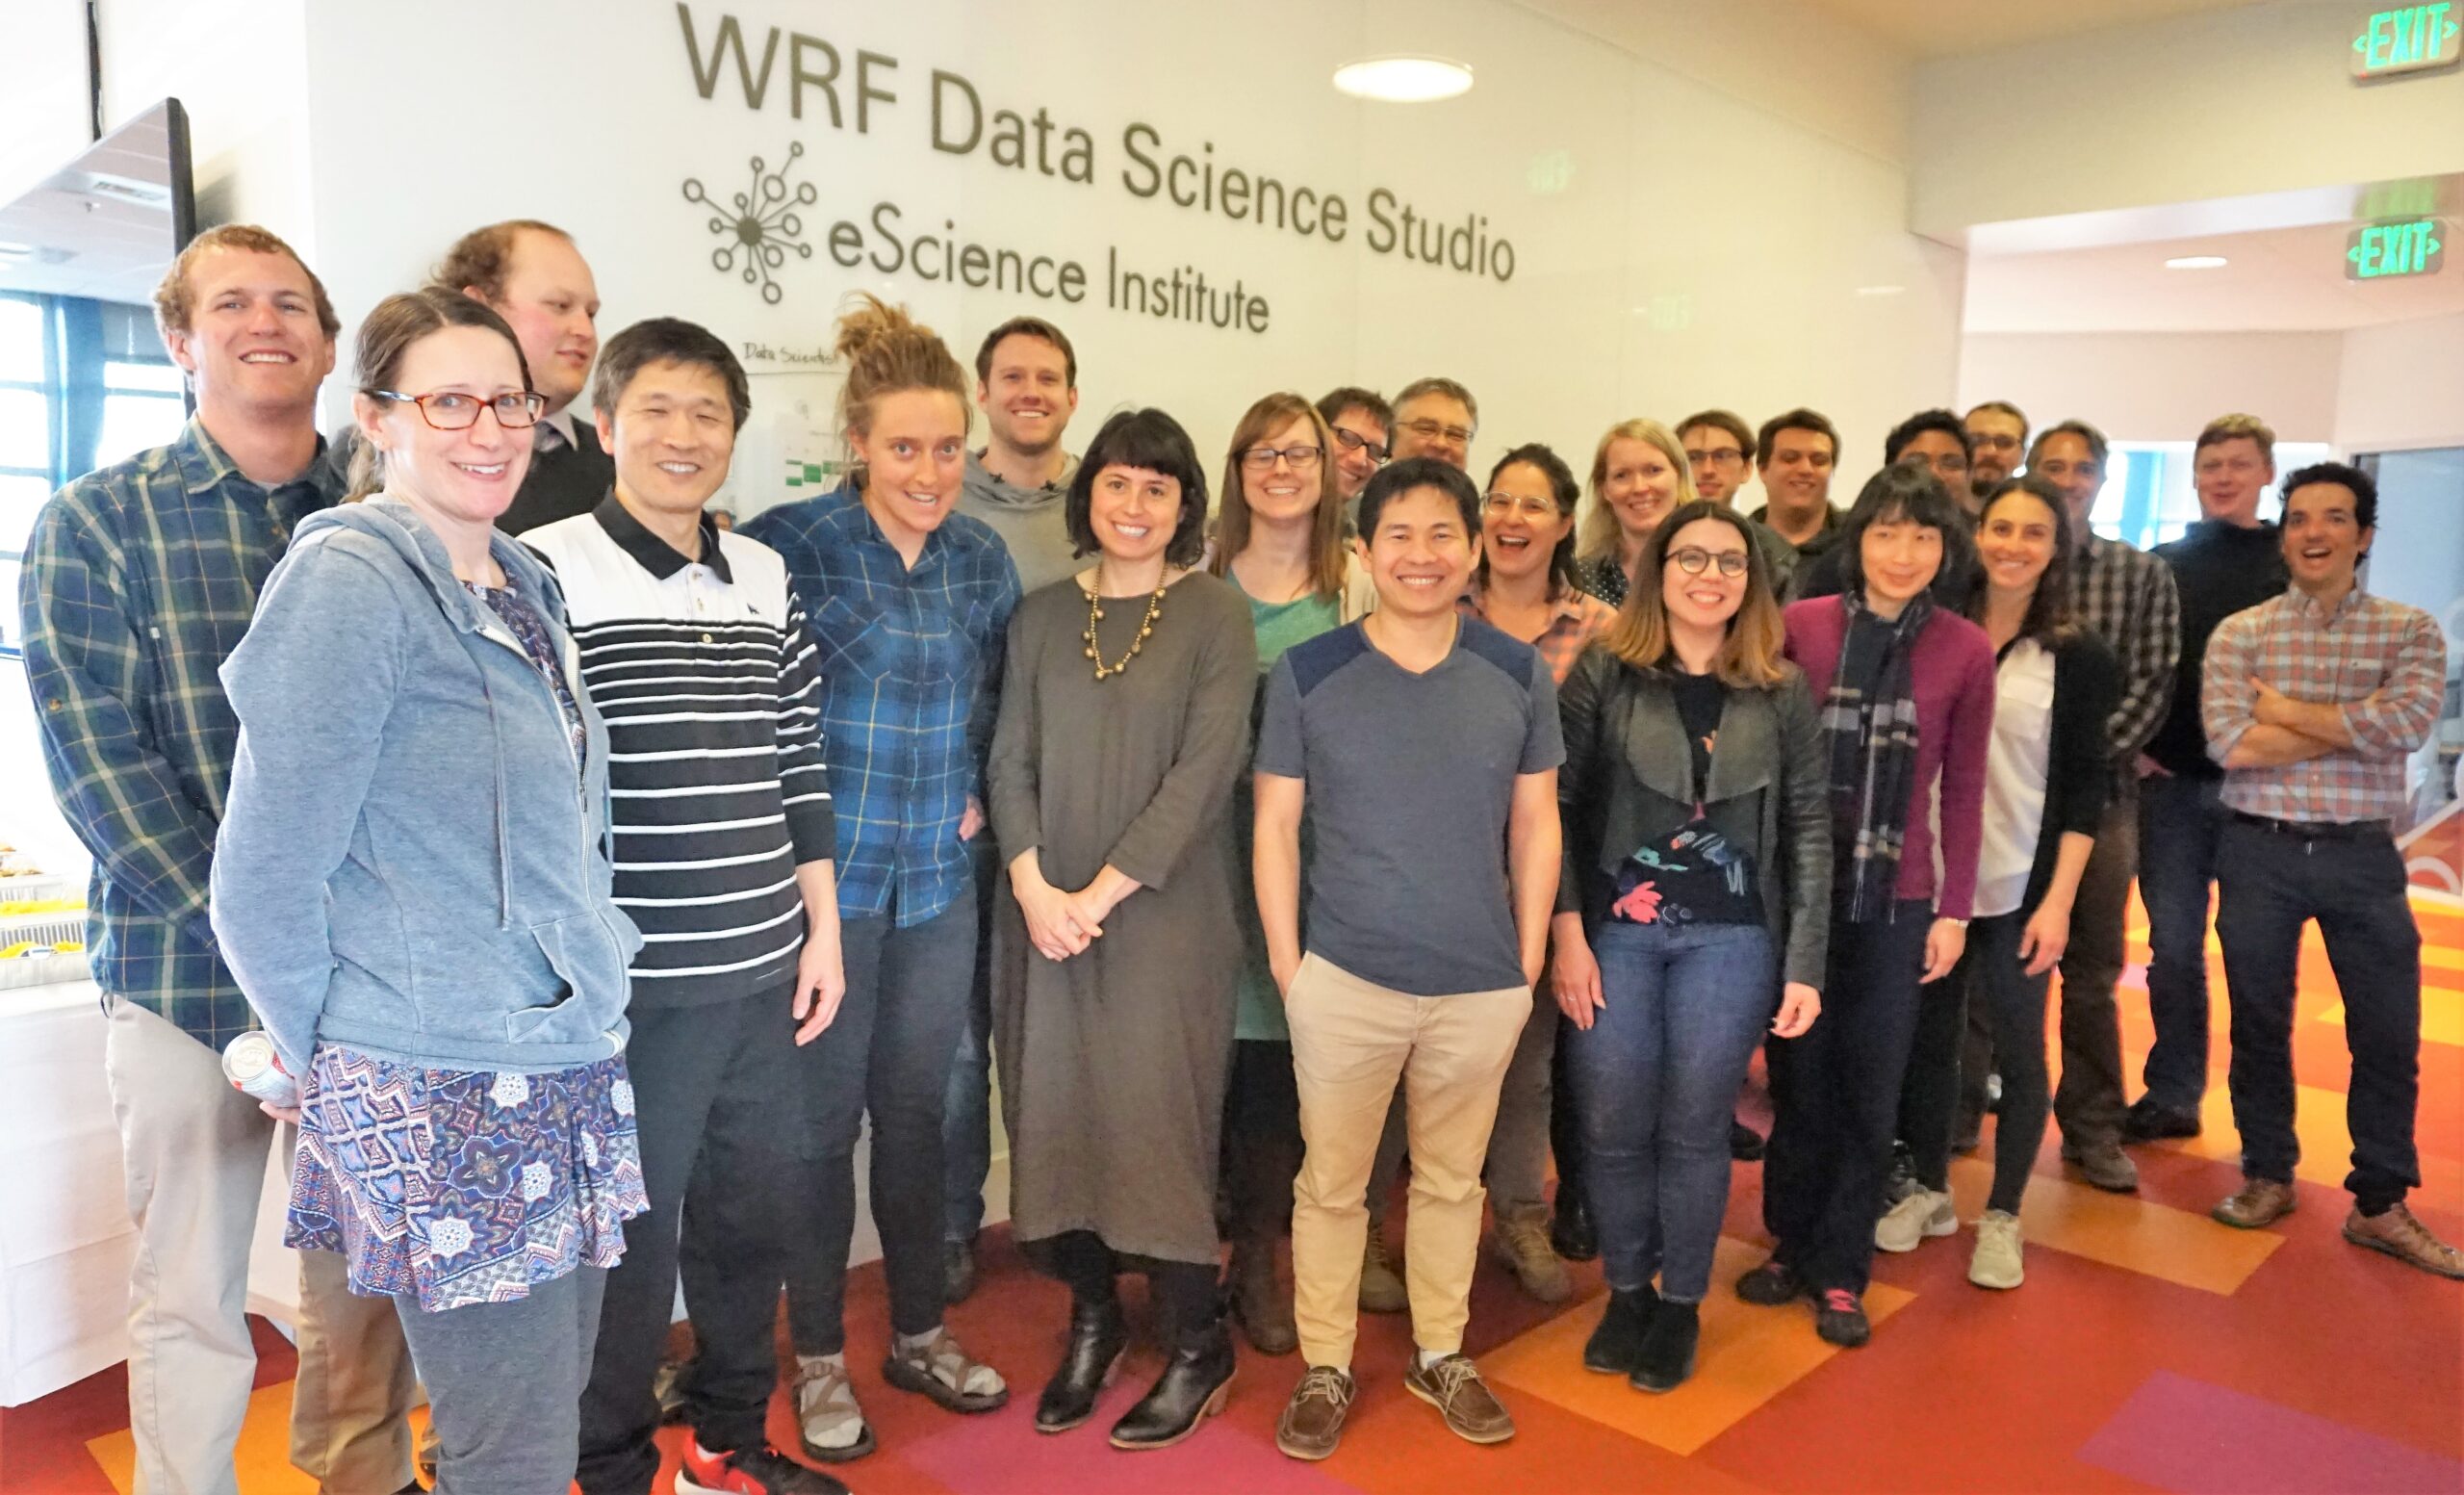 Extending data science training across the West